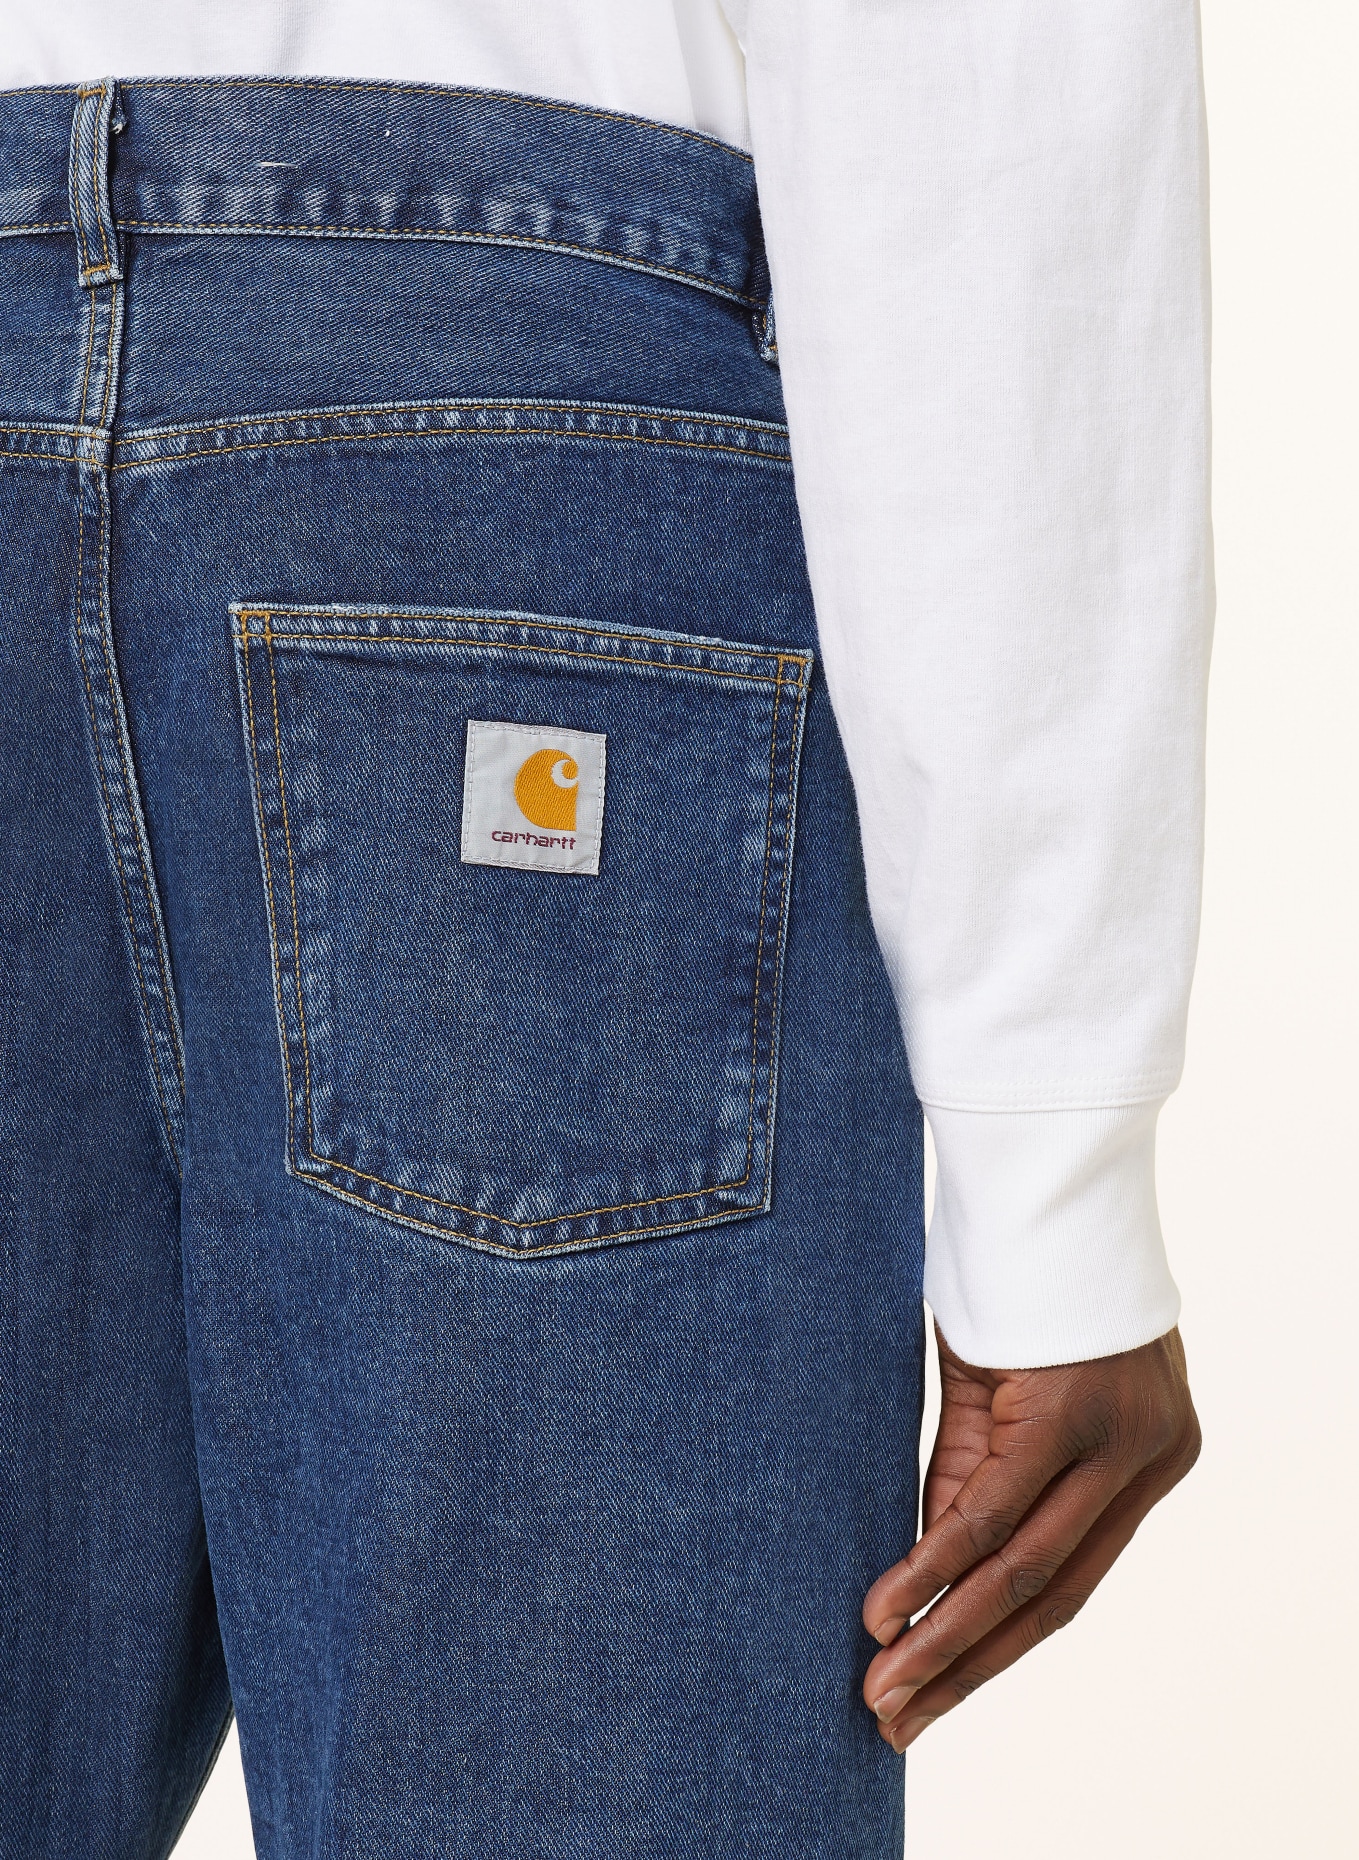 carhartt WIP Jeans NEWEL Relaxed Tapered Fit, Farbe: 0106 Blue stone washed (Bild 6)